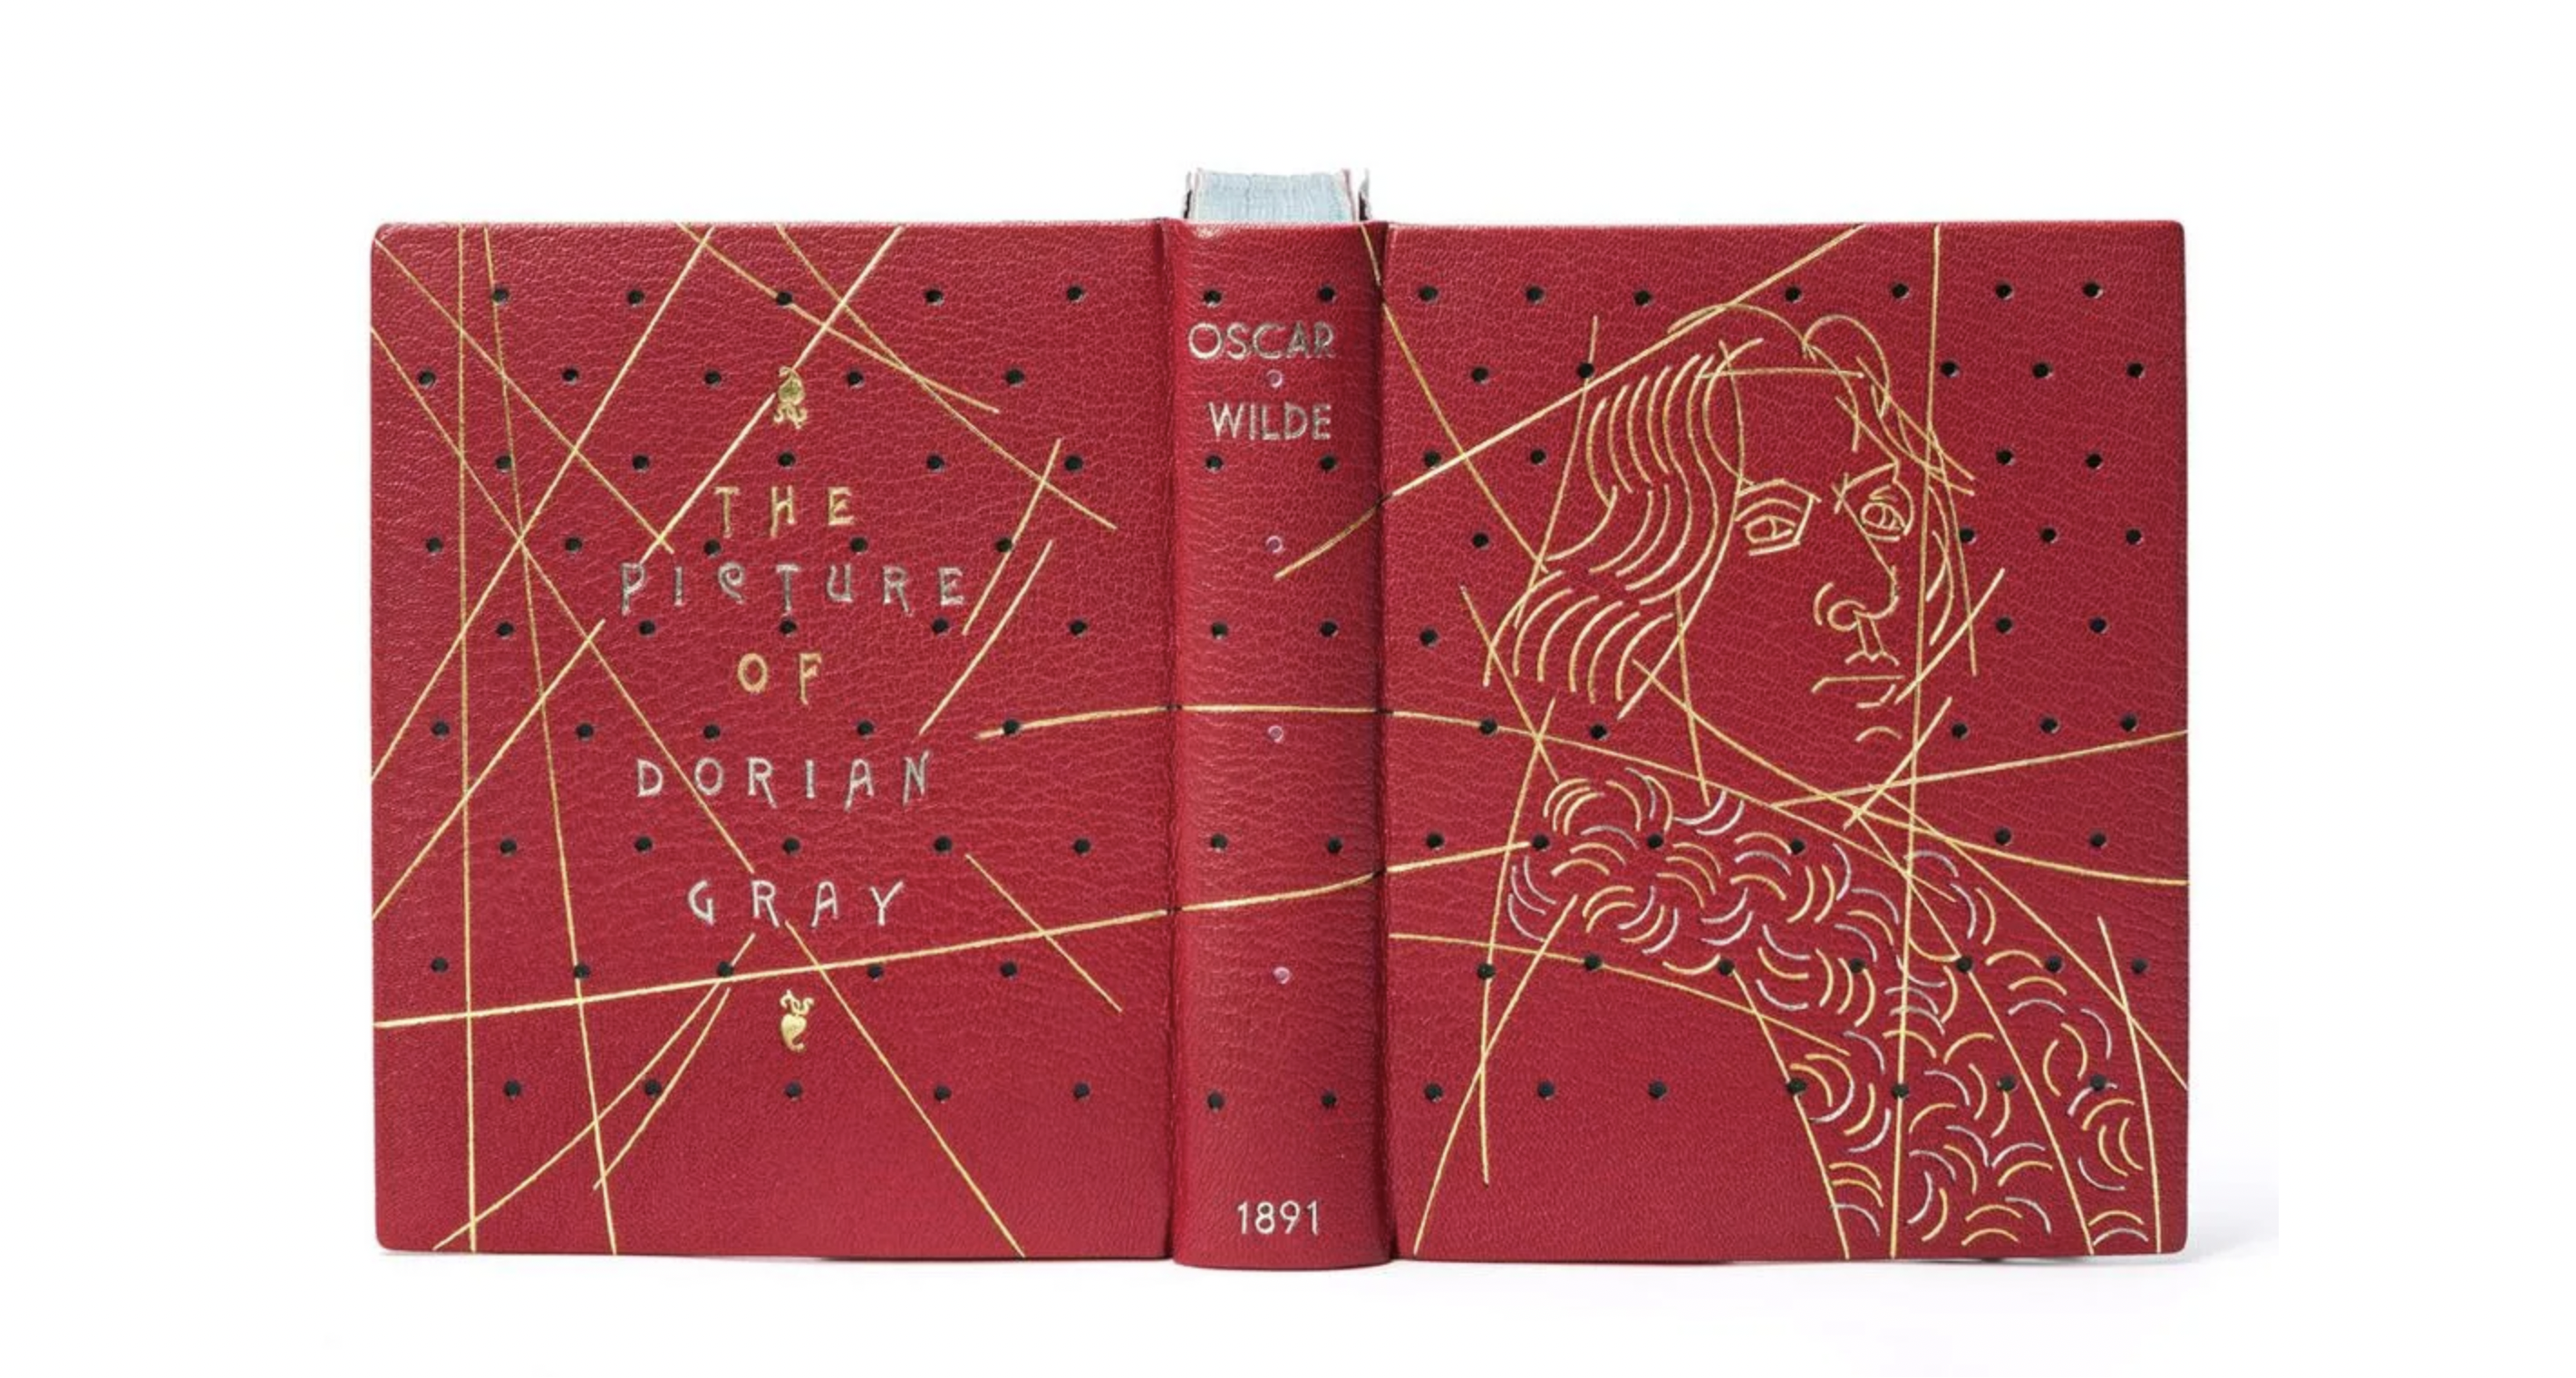  Oscar Wilde, ‘The Picture of Dorian Gray,’ signed deluxe first edition rebound in 2019 by Robert Wu, est. $25,000-$35,000